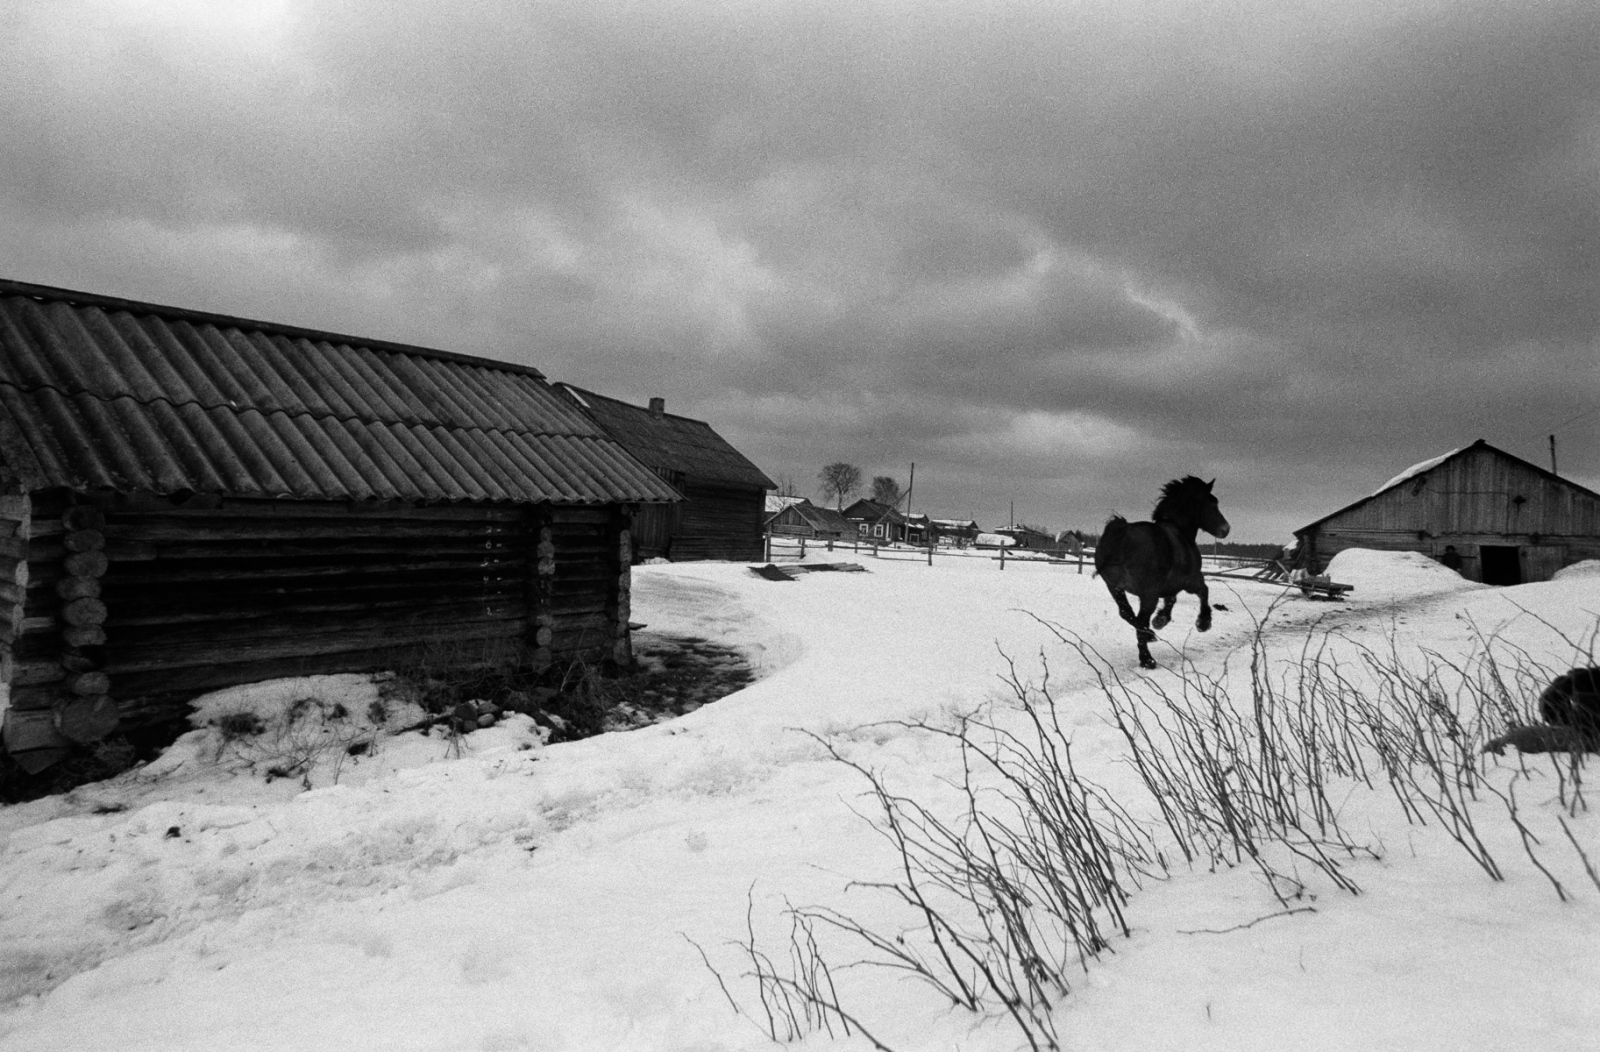 Russia - The Village of Anufrievo - The village horse is let out to gallop through the snow.